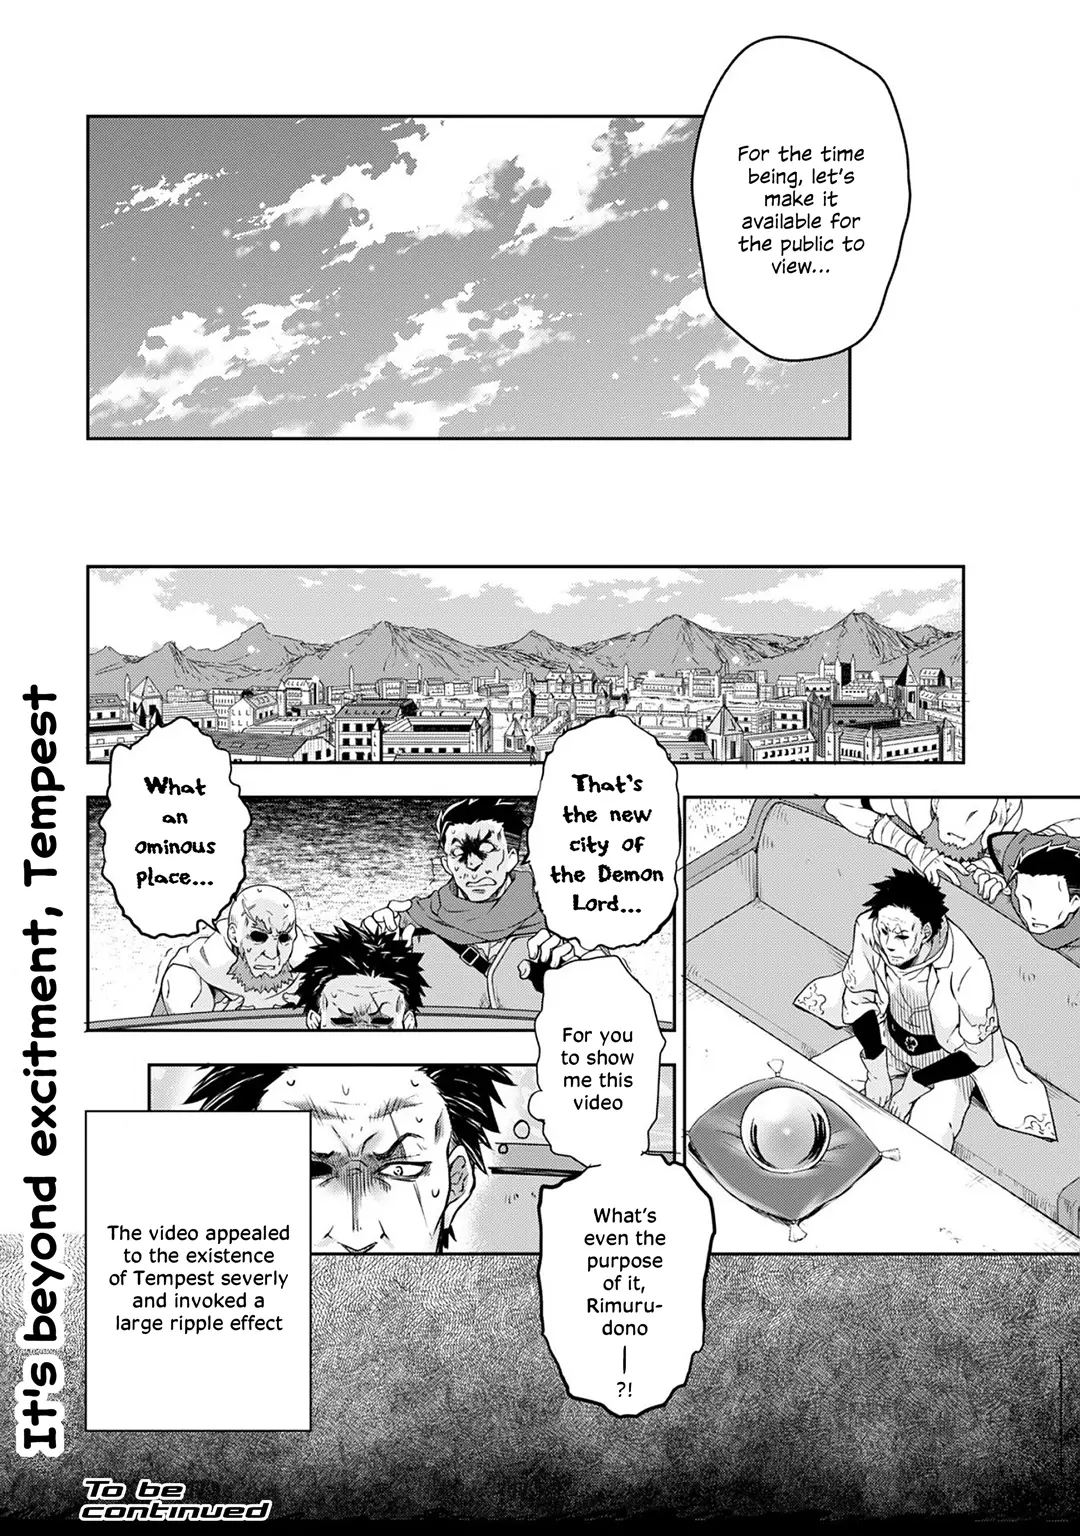 Tensei Shitara Slime Datta Ken: The Ways of Strolling in the Demon Country - 33 page 32